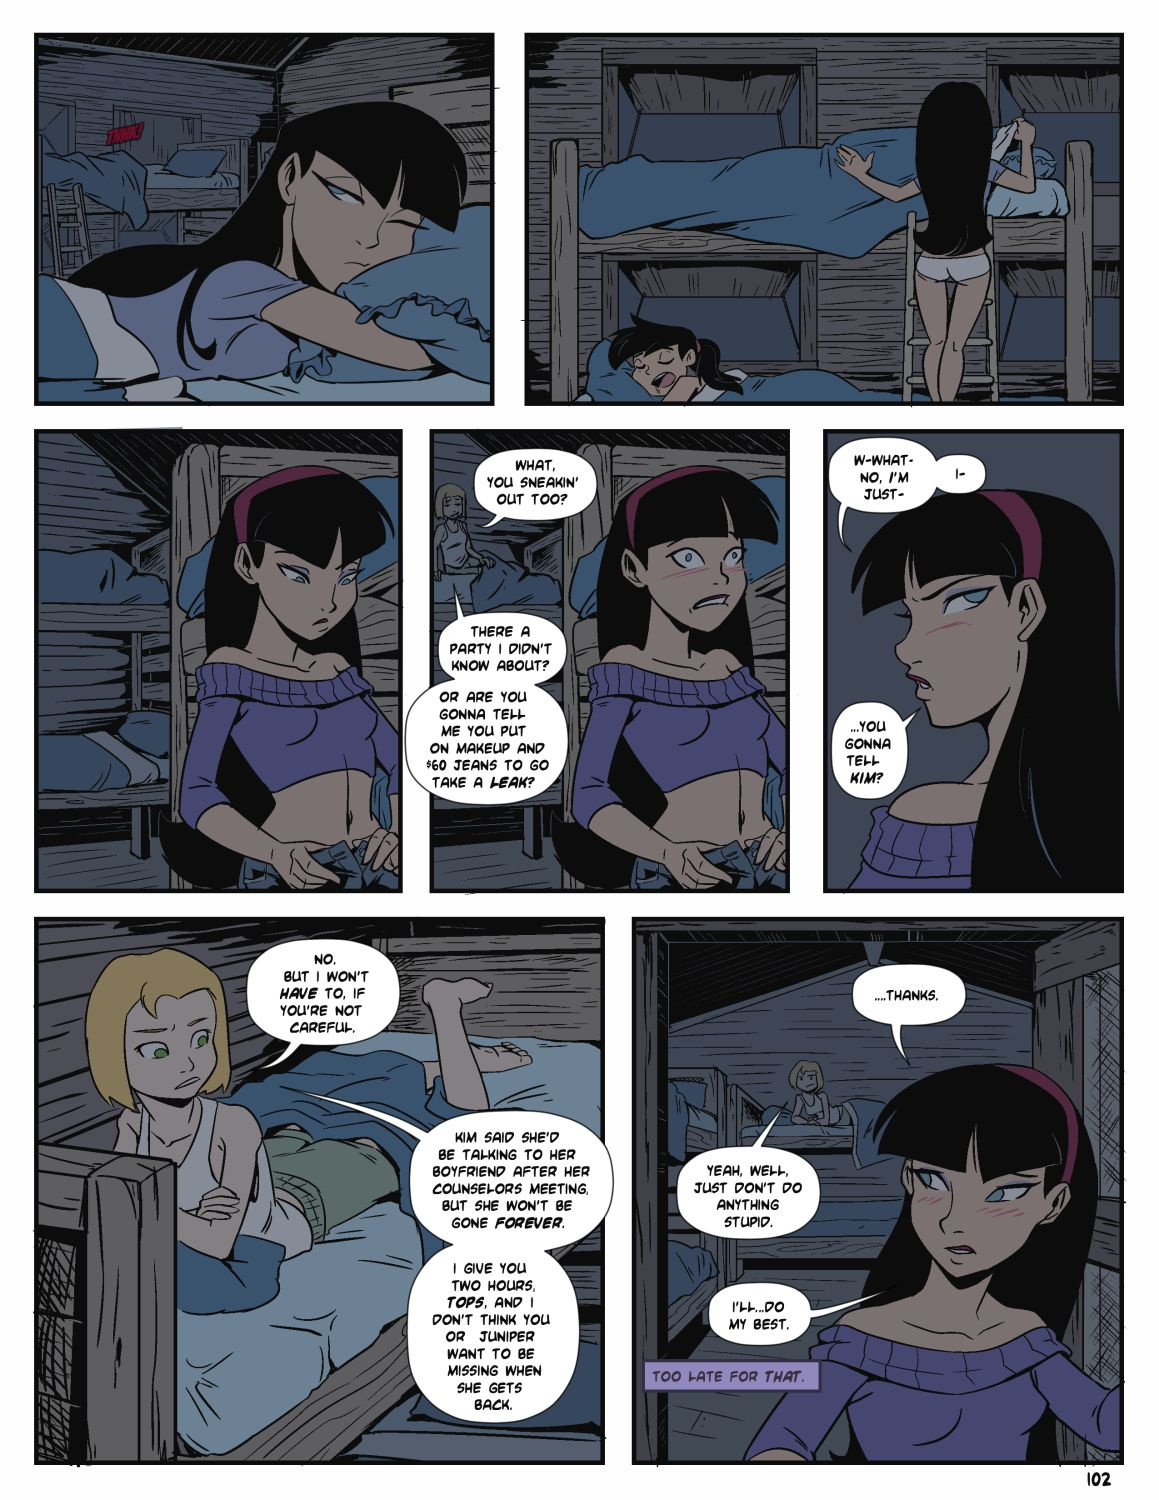 Camp Sherwood porn comics Oral sex, Anal Sex, Asian Girls, Best, Blowjob, Creampie, Cum Shots, Cum Swallow, cunnilingus, Double Penetration, fingering, Group Sex, Lesbians, Lolicon, Masturbation, Rape, Rule 63, Sex and Magic, Straight, Straight Shota, Tentacles, Threesome, X-Ray